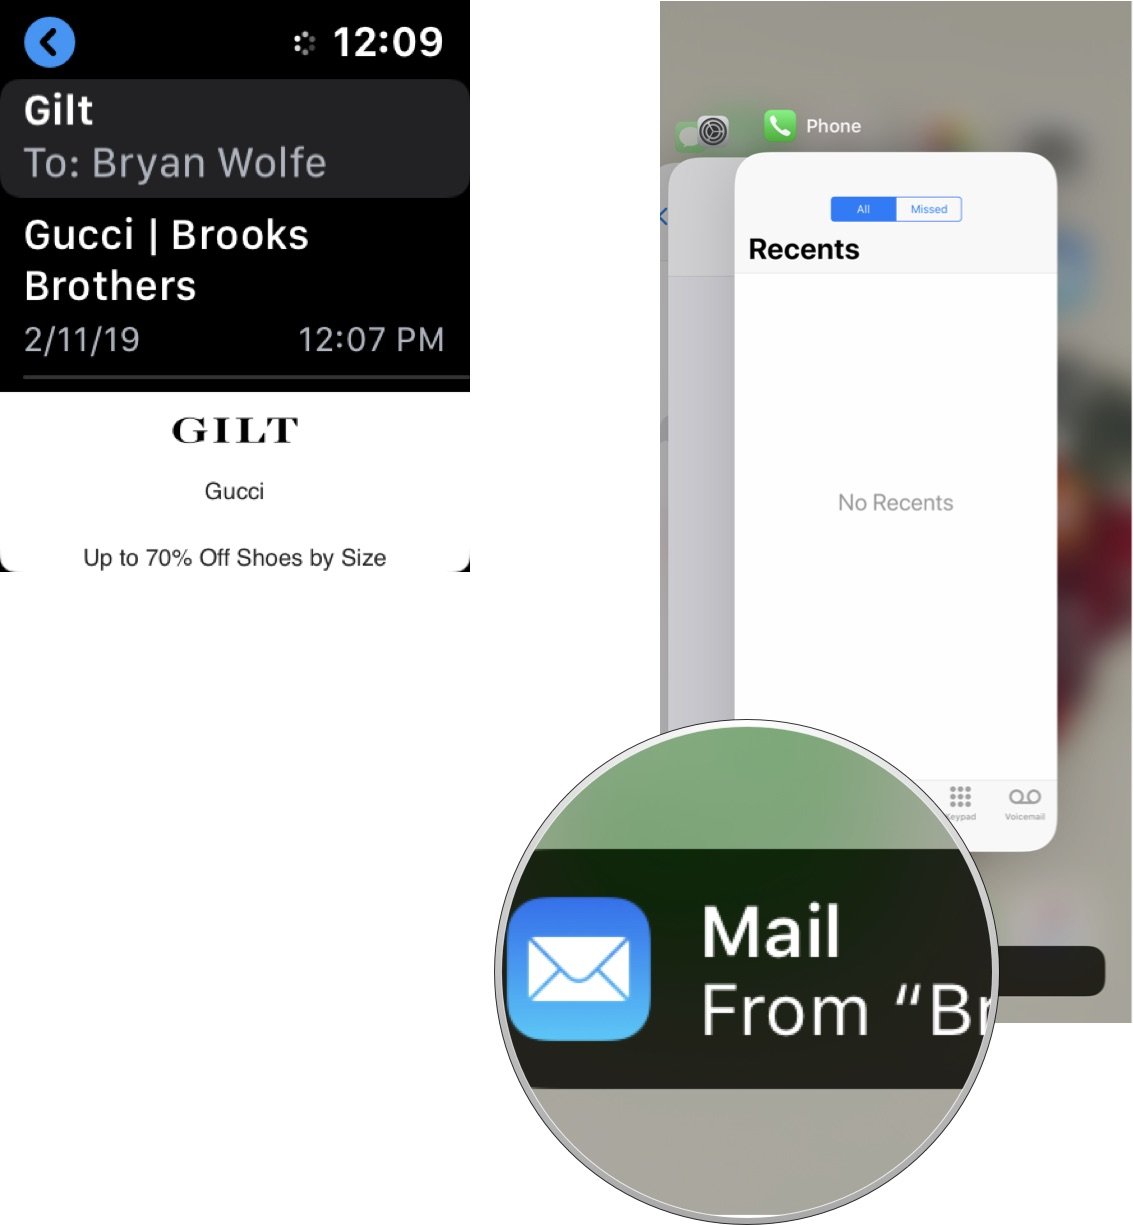 To transfer an email from Apple Watch to iPhone, open the Mail app, then tap on the thread in question. Next, select the app switcher on your iPhone. Tap the Handoff option.